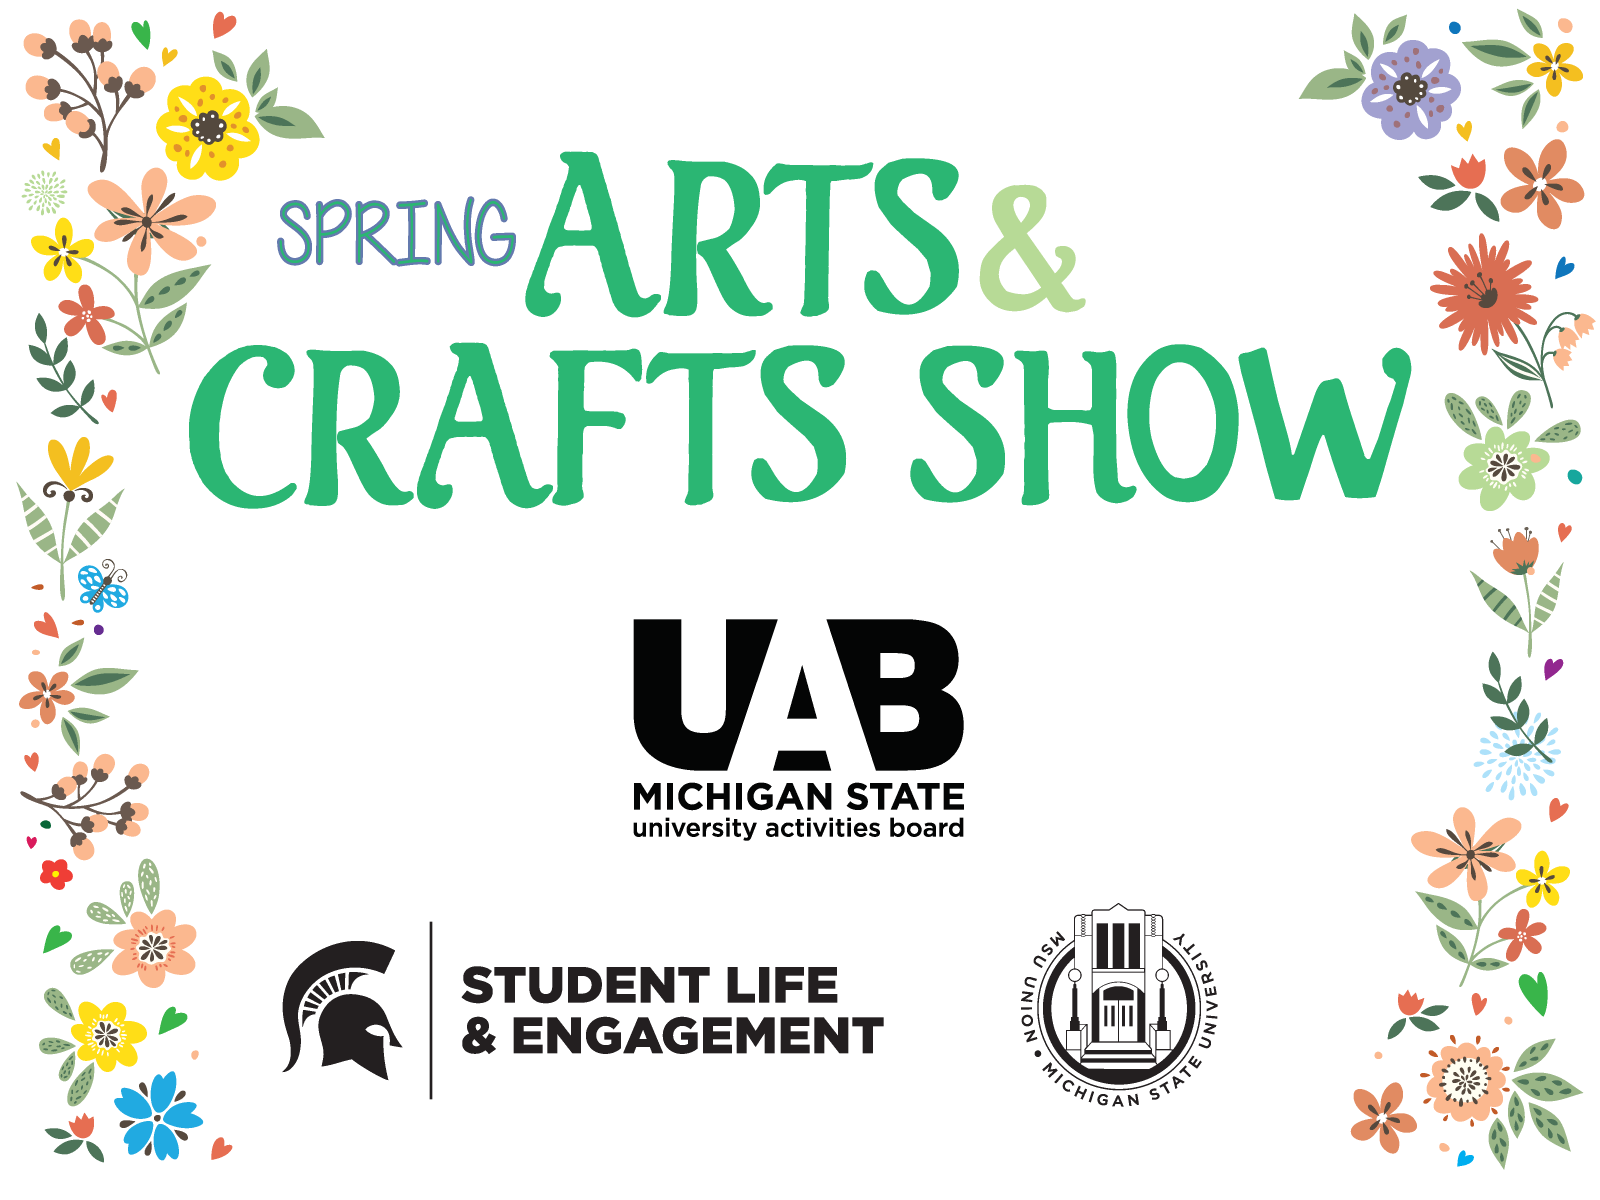 Spring Arts & Craft Show poster with flowers. Includes UAB, MSU Union, MSU Student Life and Engagement logos.